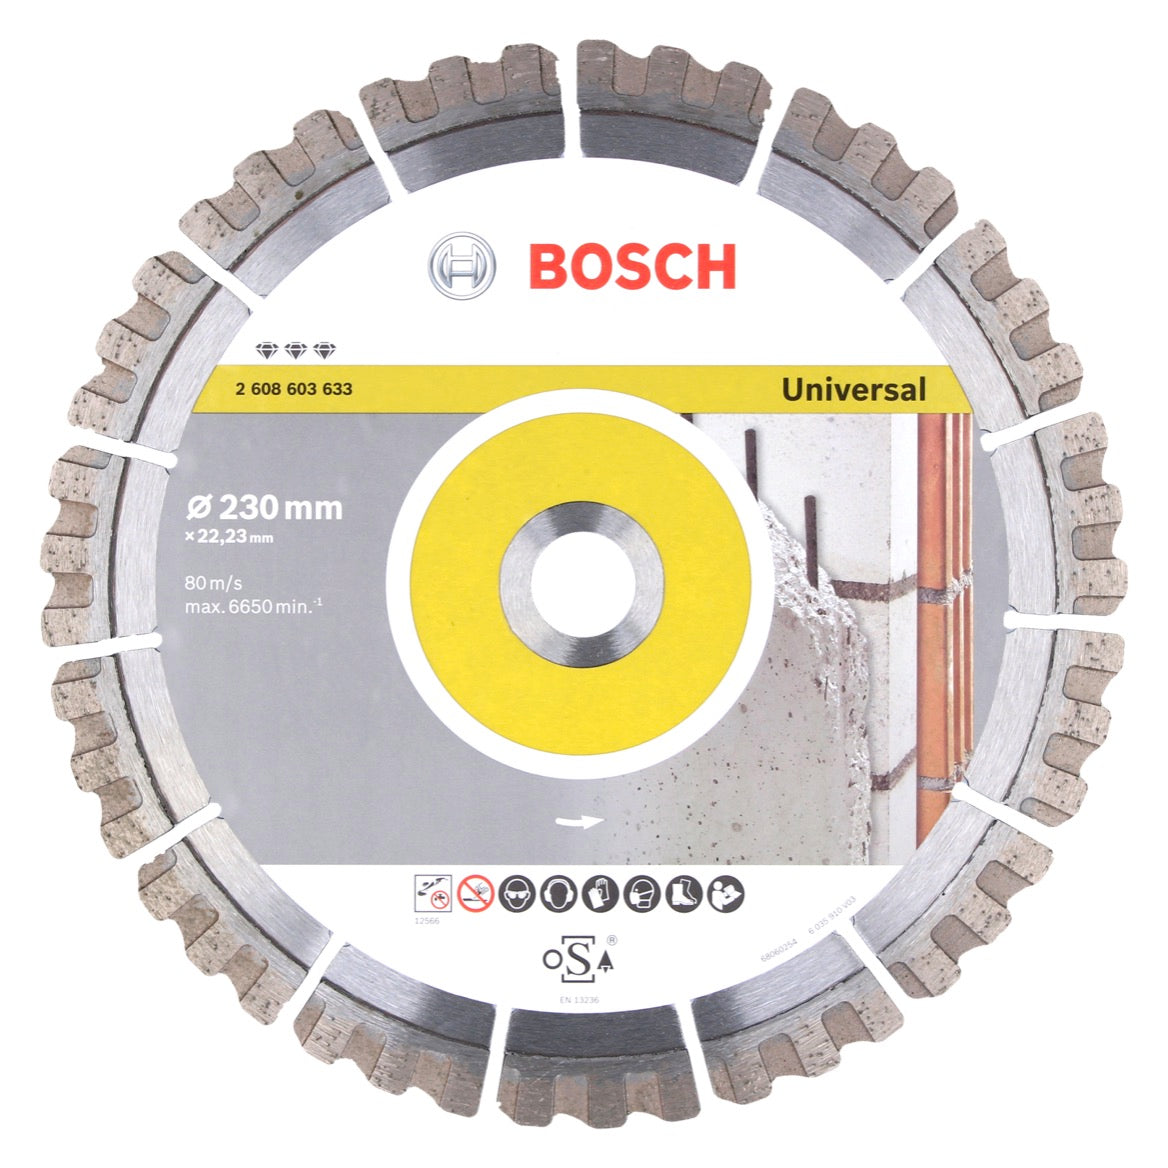 Bosch Diamant Trennscheibe Best Toolbrothers for – 230 mm ( 2608603 22,23 x Universal